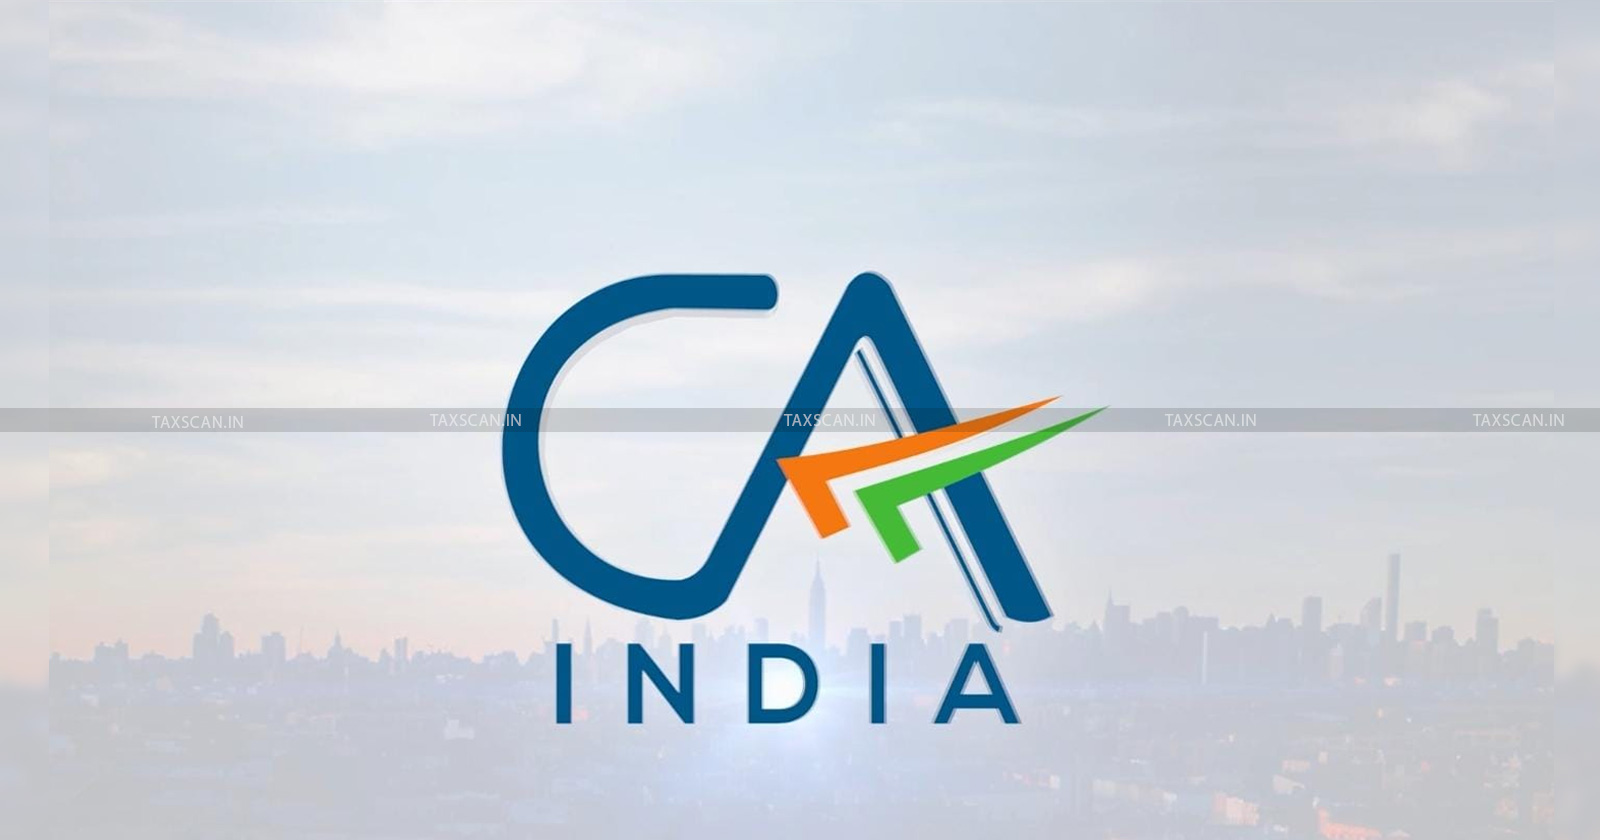 Clearly unbecoming Chartered Accountan - ICAI reprimands CA - CA - TAXSCAN